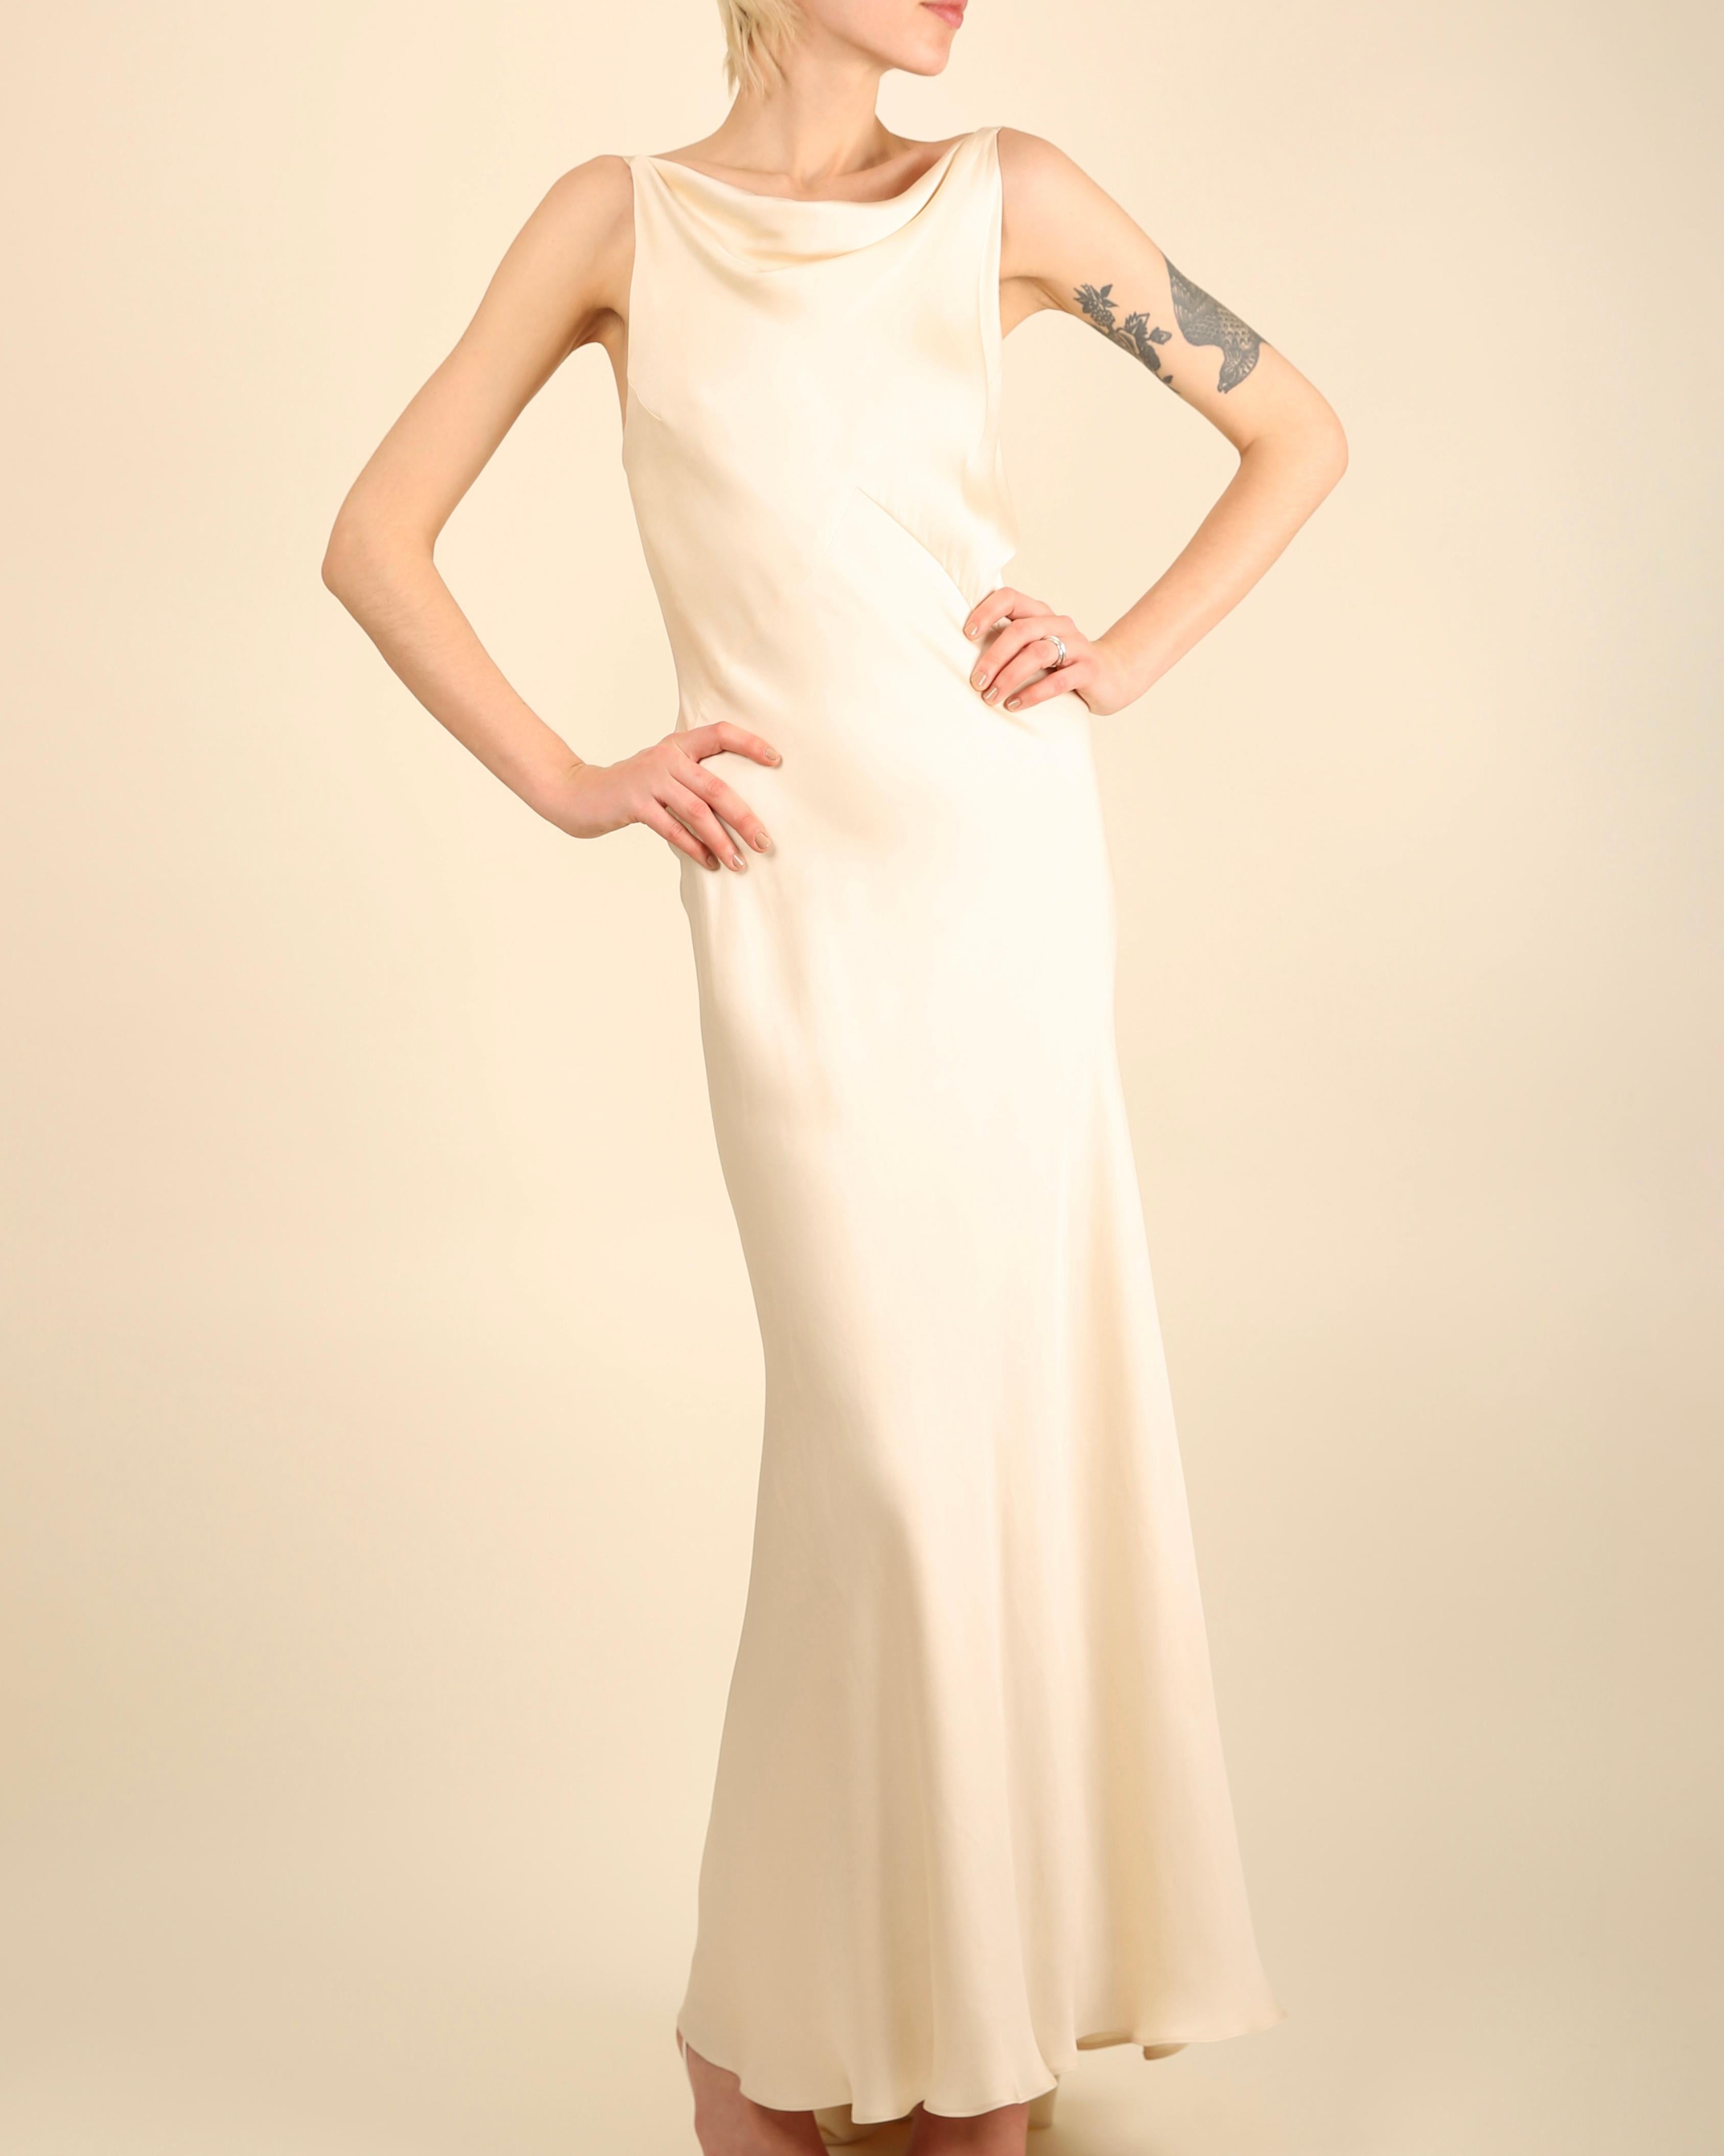 Ralph Lauren champagne bias cut backless silk slip style backless gown dress For Sale 2